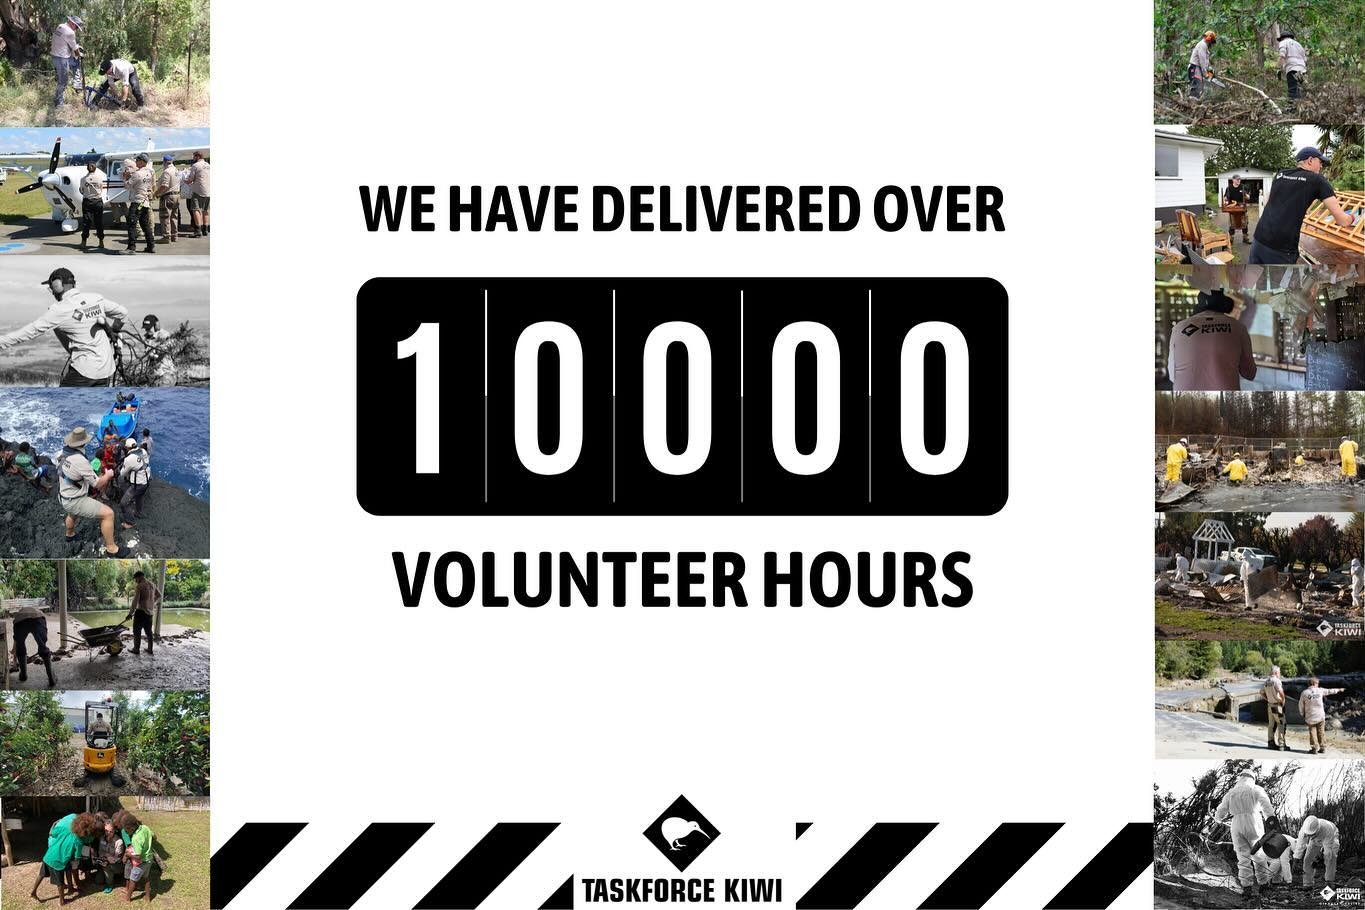 We are proud to share that Taskforce Kiwi&rsquo;s skilled volunteers have now carried out over 10,000 hours of direct assistance for communities in the wake of disaster. 

Our defence and emergency services veterans, and members of the wider communit